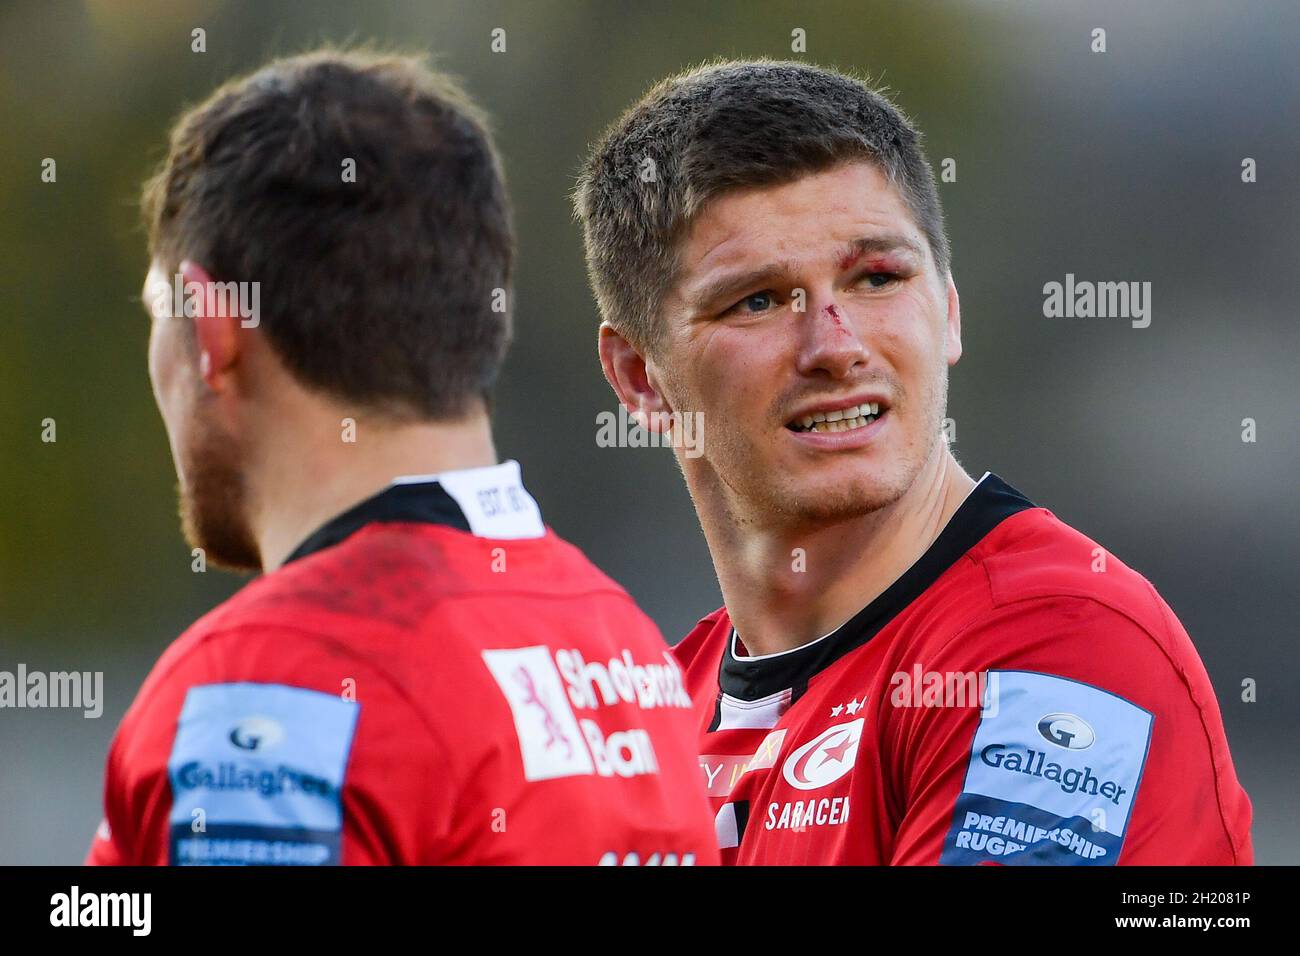 The Recreation Ground, Bath, England, UK. 17th October, 2021. Saracens' Owen Farrell with Alex Goode after the Gallagher English Premiership match between Bath Rugby and Saracens: Credit: Ashley Western/Alamy Live News Stock Photo